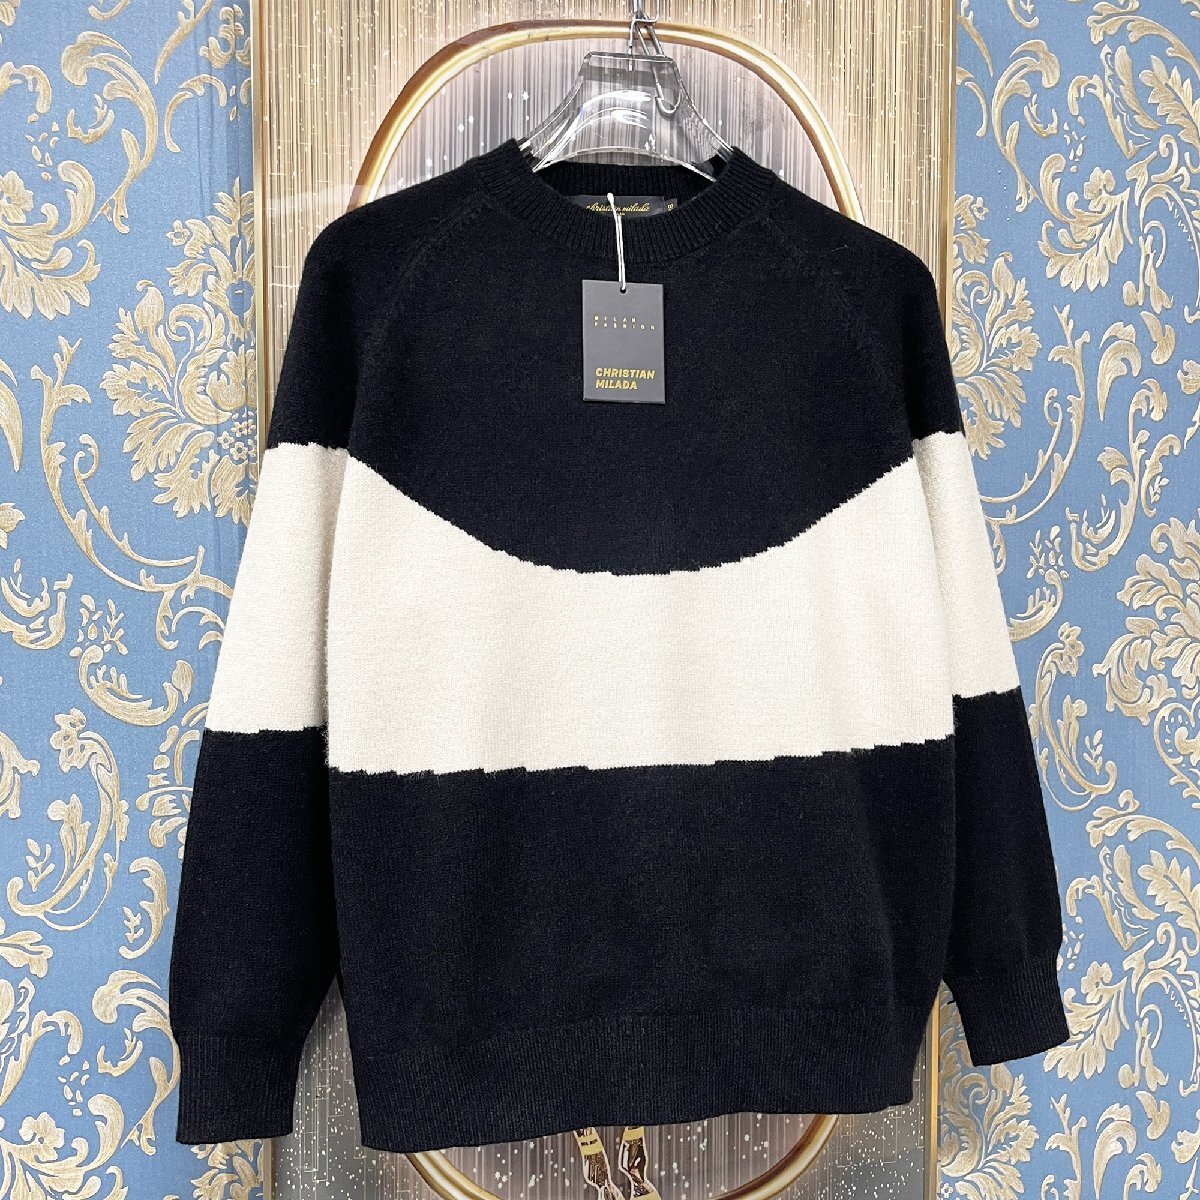  regular price 5 ten thousand *christian milada* milano departure * sweater * on goods heat insulation soft switch knitted tops clean . put on .. elegant lady's M/36